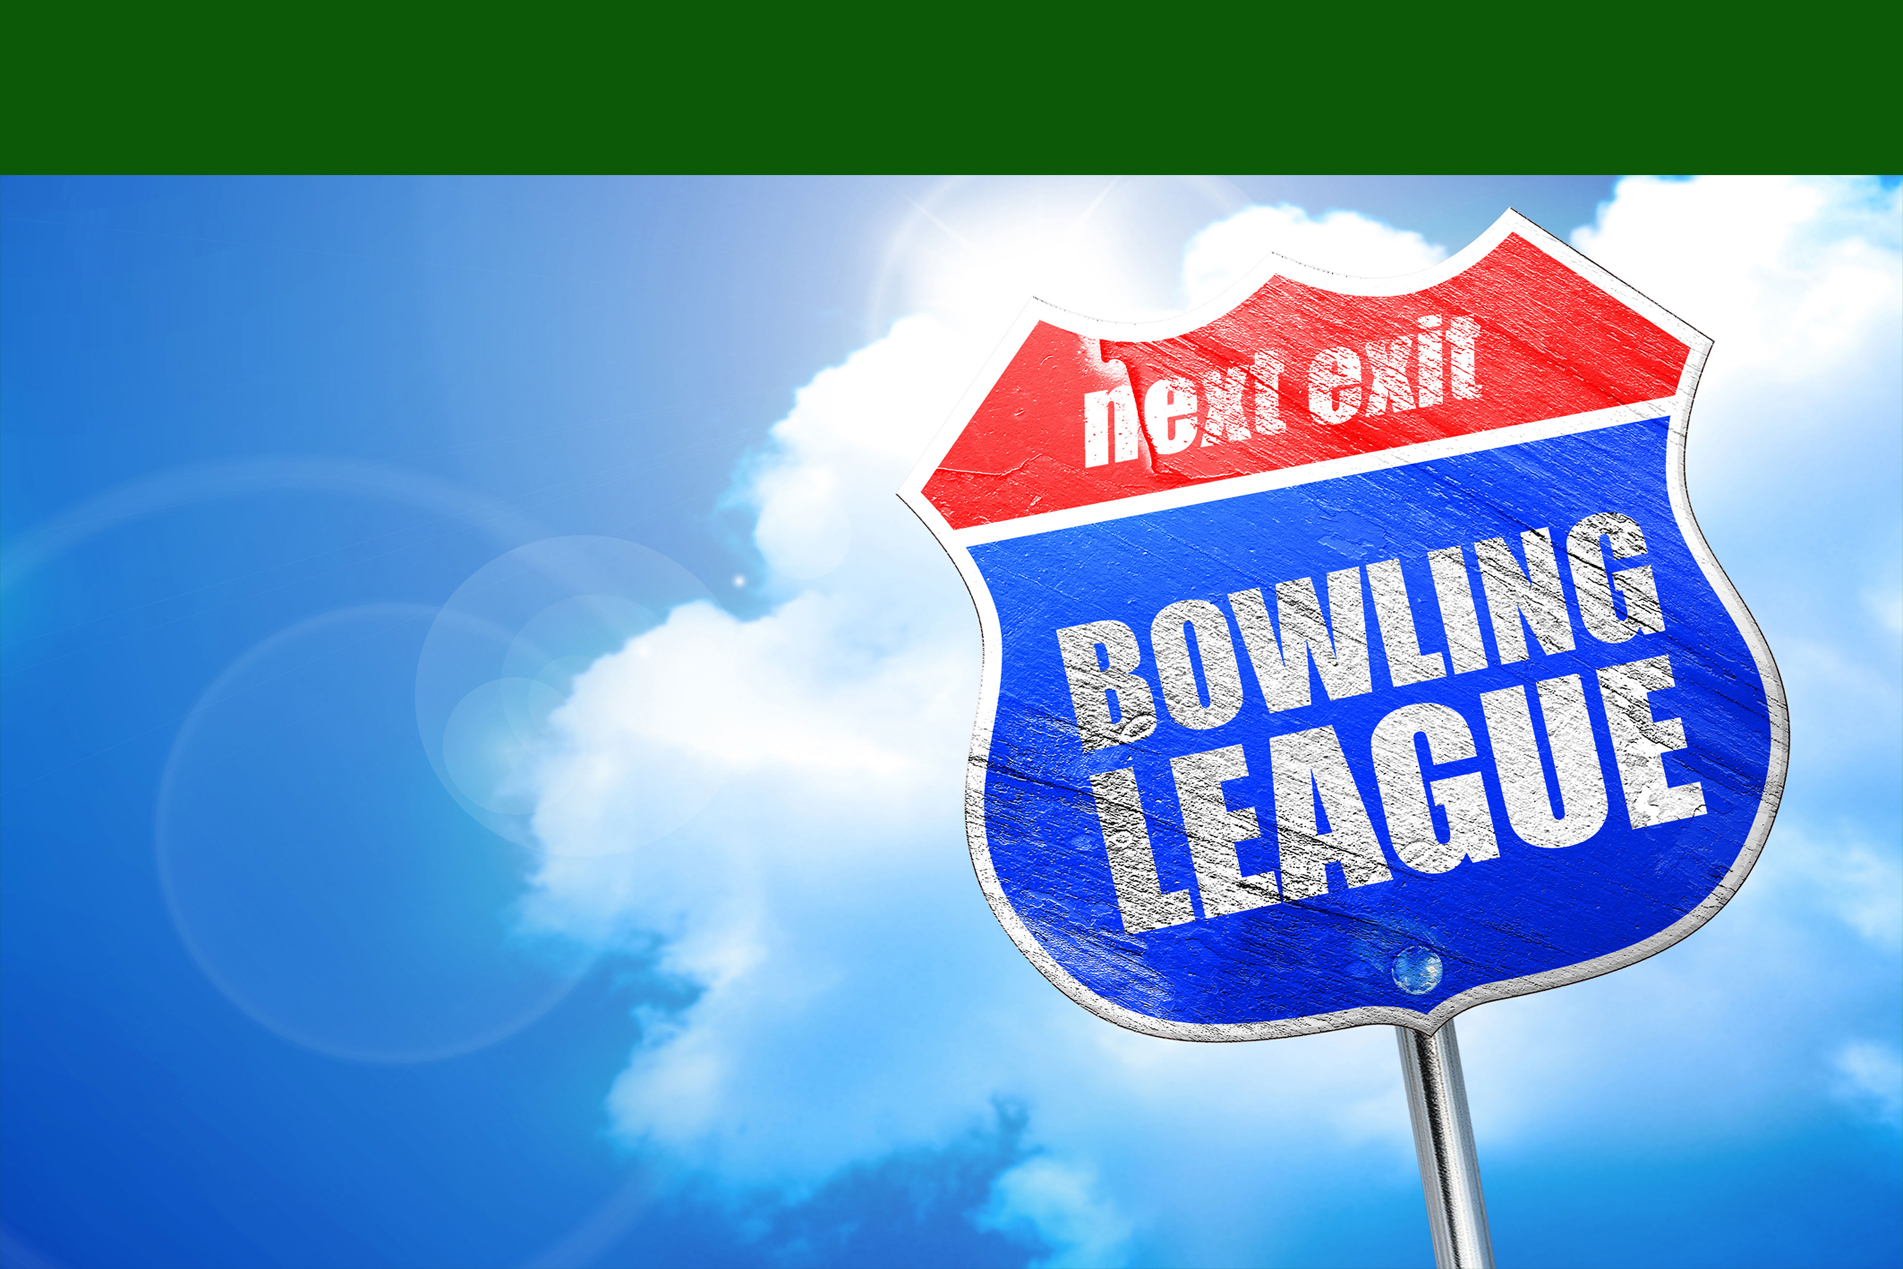 Street sign that says Bowling League